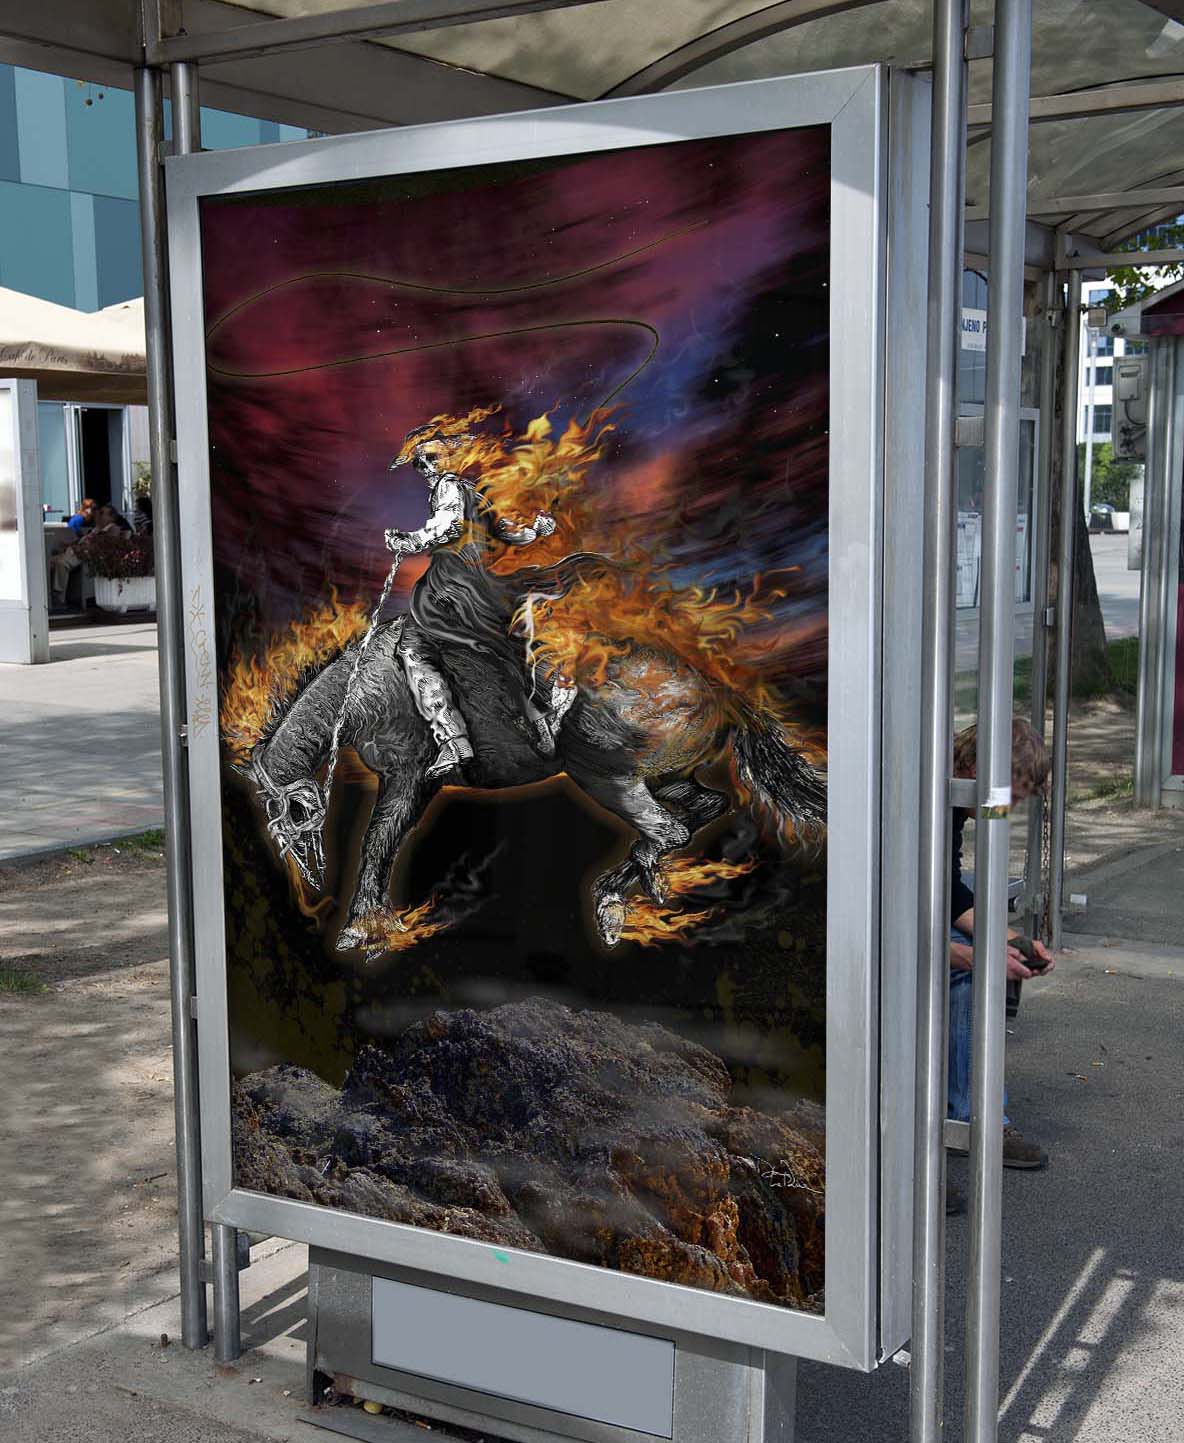 Texas Ghost Rider in a metal bus stop poster display 